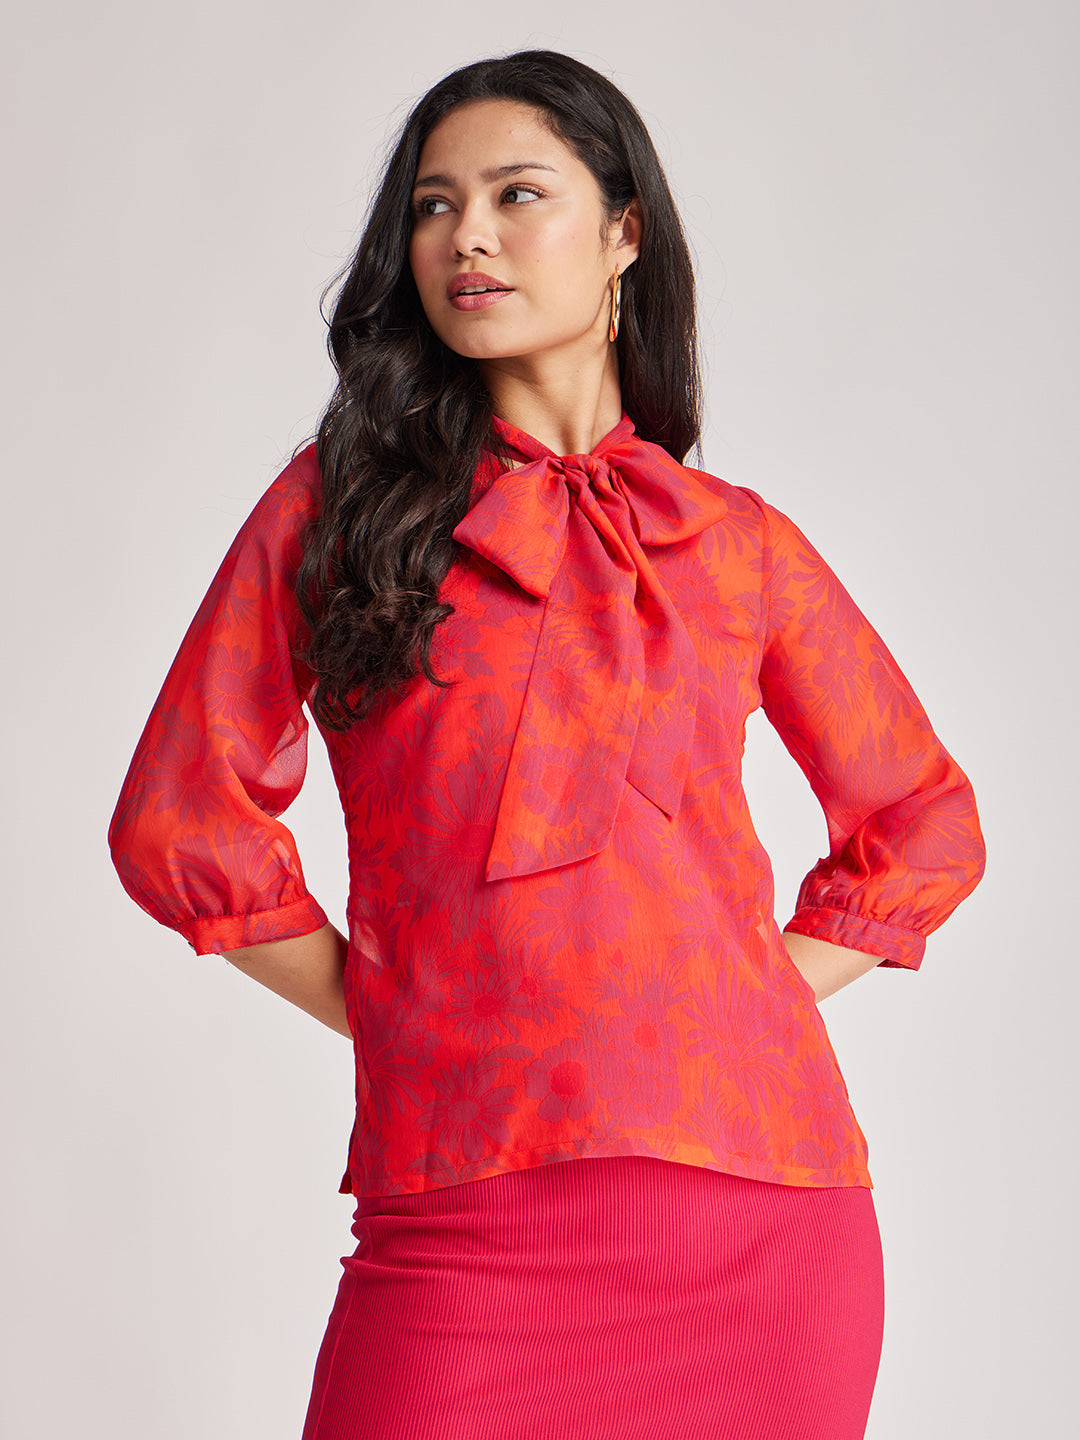 Floral Tie-up Top - Orange And Fuchsia